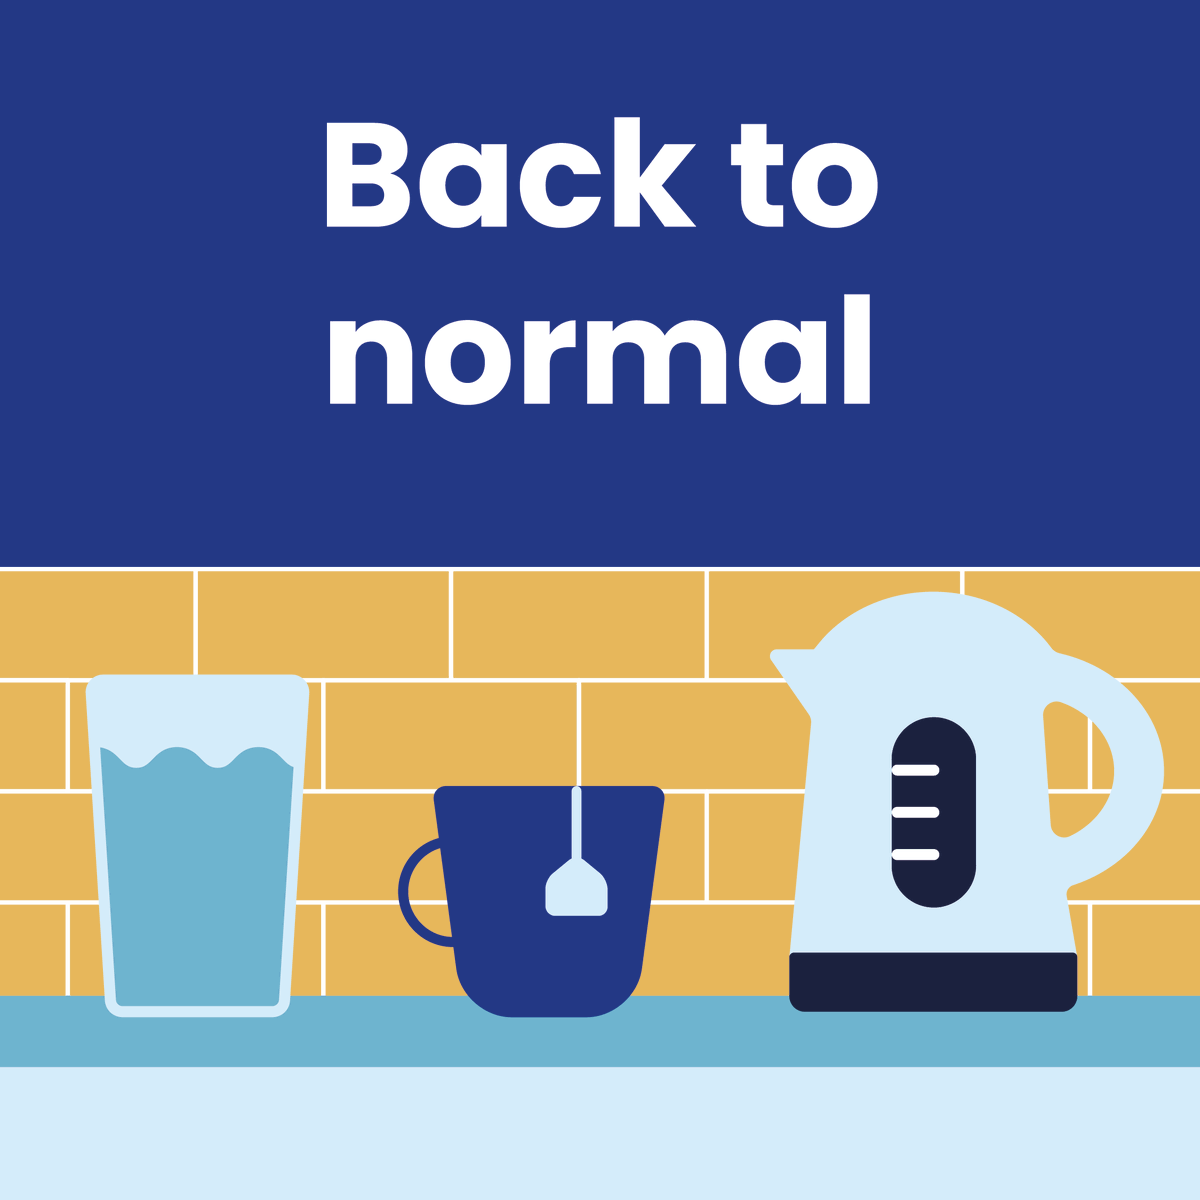 ⚠️ #Whingate #LS12 – UPDATE

Good news! The repair’s been done and supplies are back on. You may experience discoloured or cloudy water - this is nothing to worry about and will clear in time. If you would like more advice visit: ow.ly/l20N50RlmmE NAME